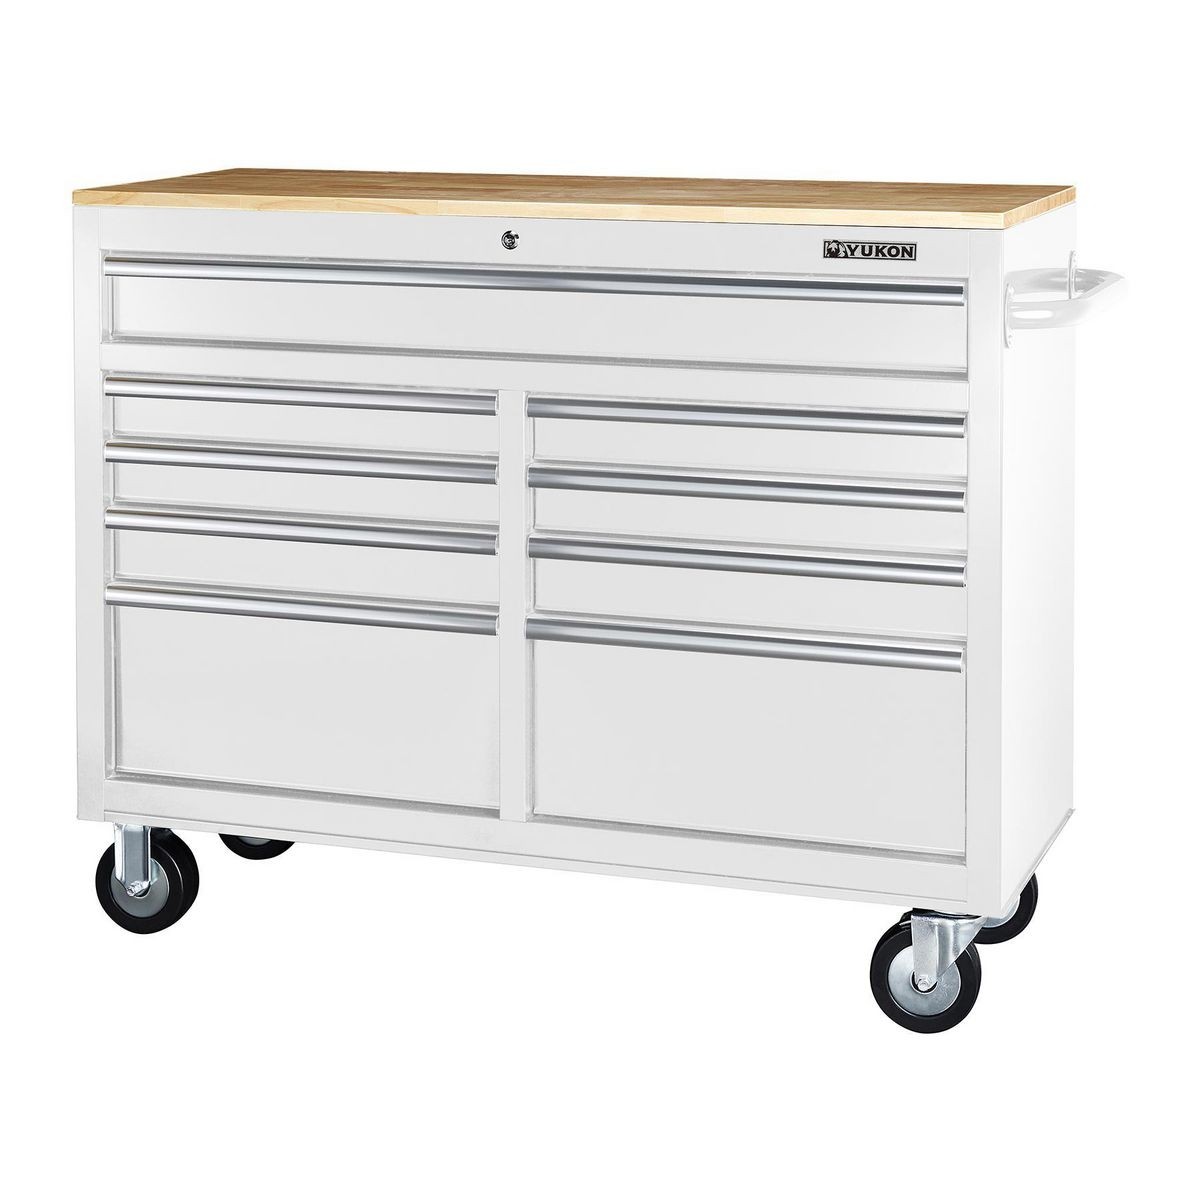 YUKON 46 In. 9-Drawer Mobile Storage Cabinet With Solid Wood Top – White - Item 57439